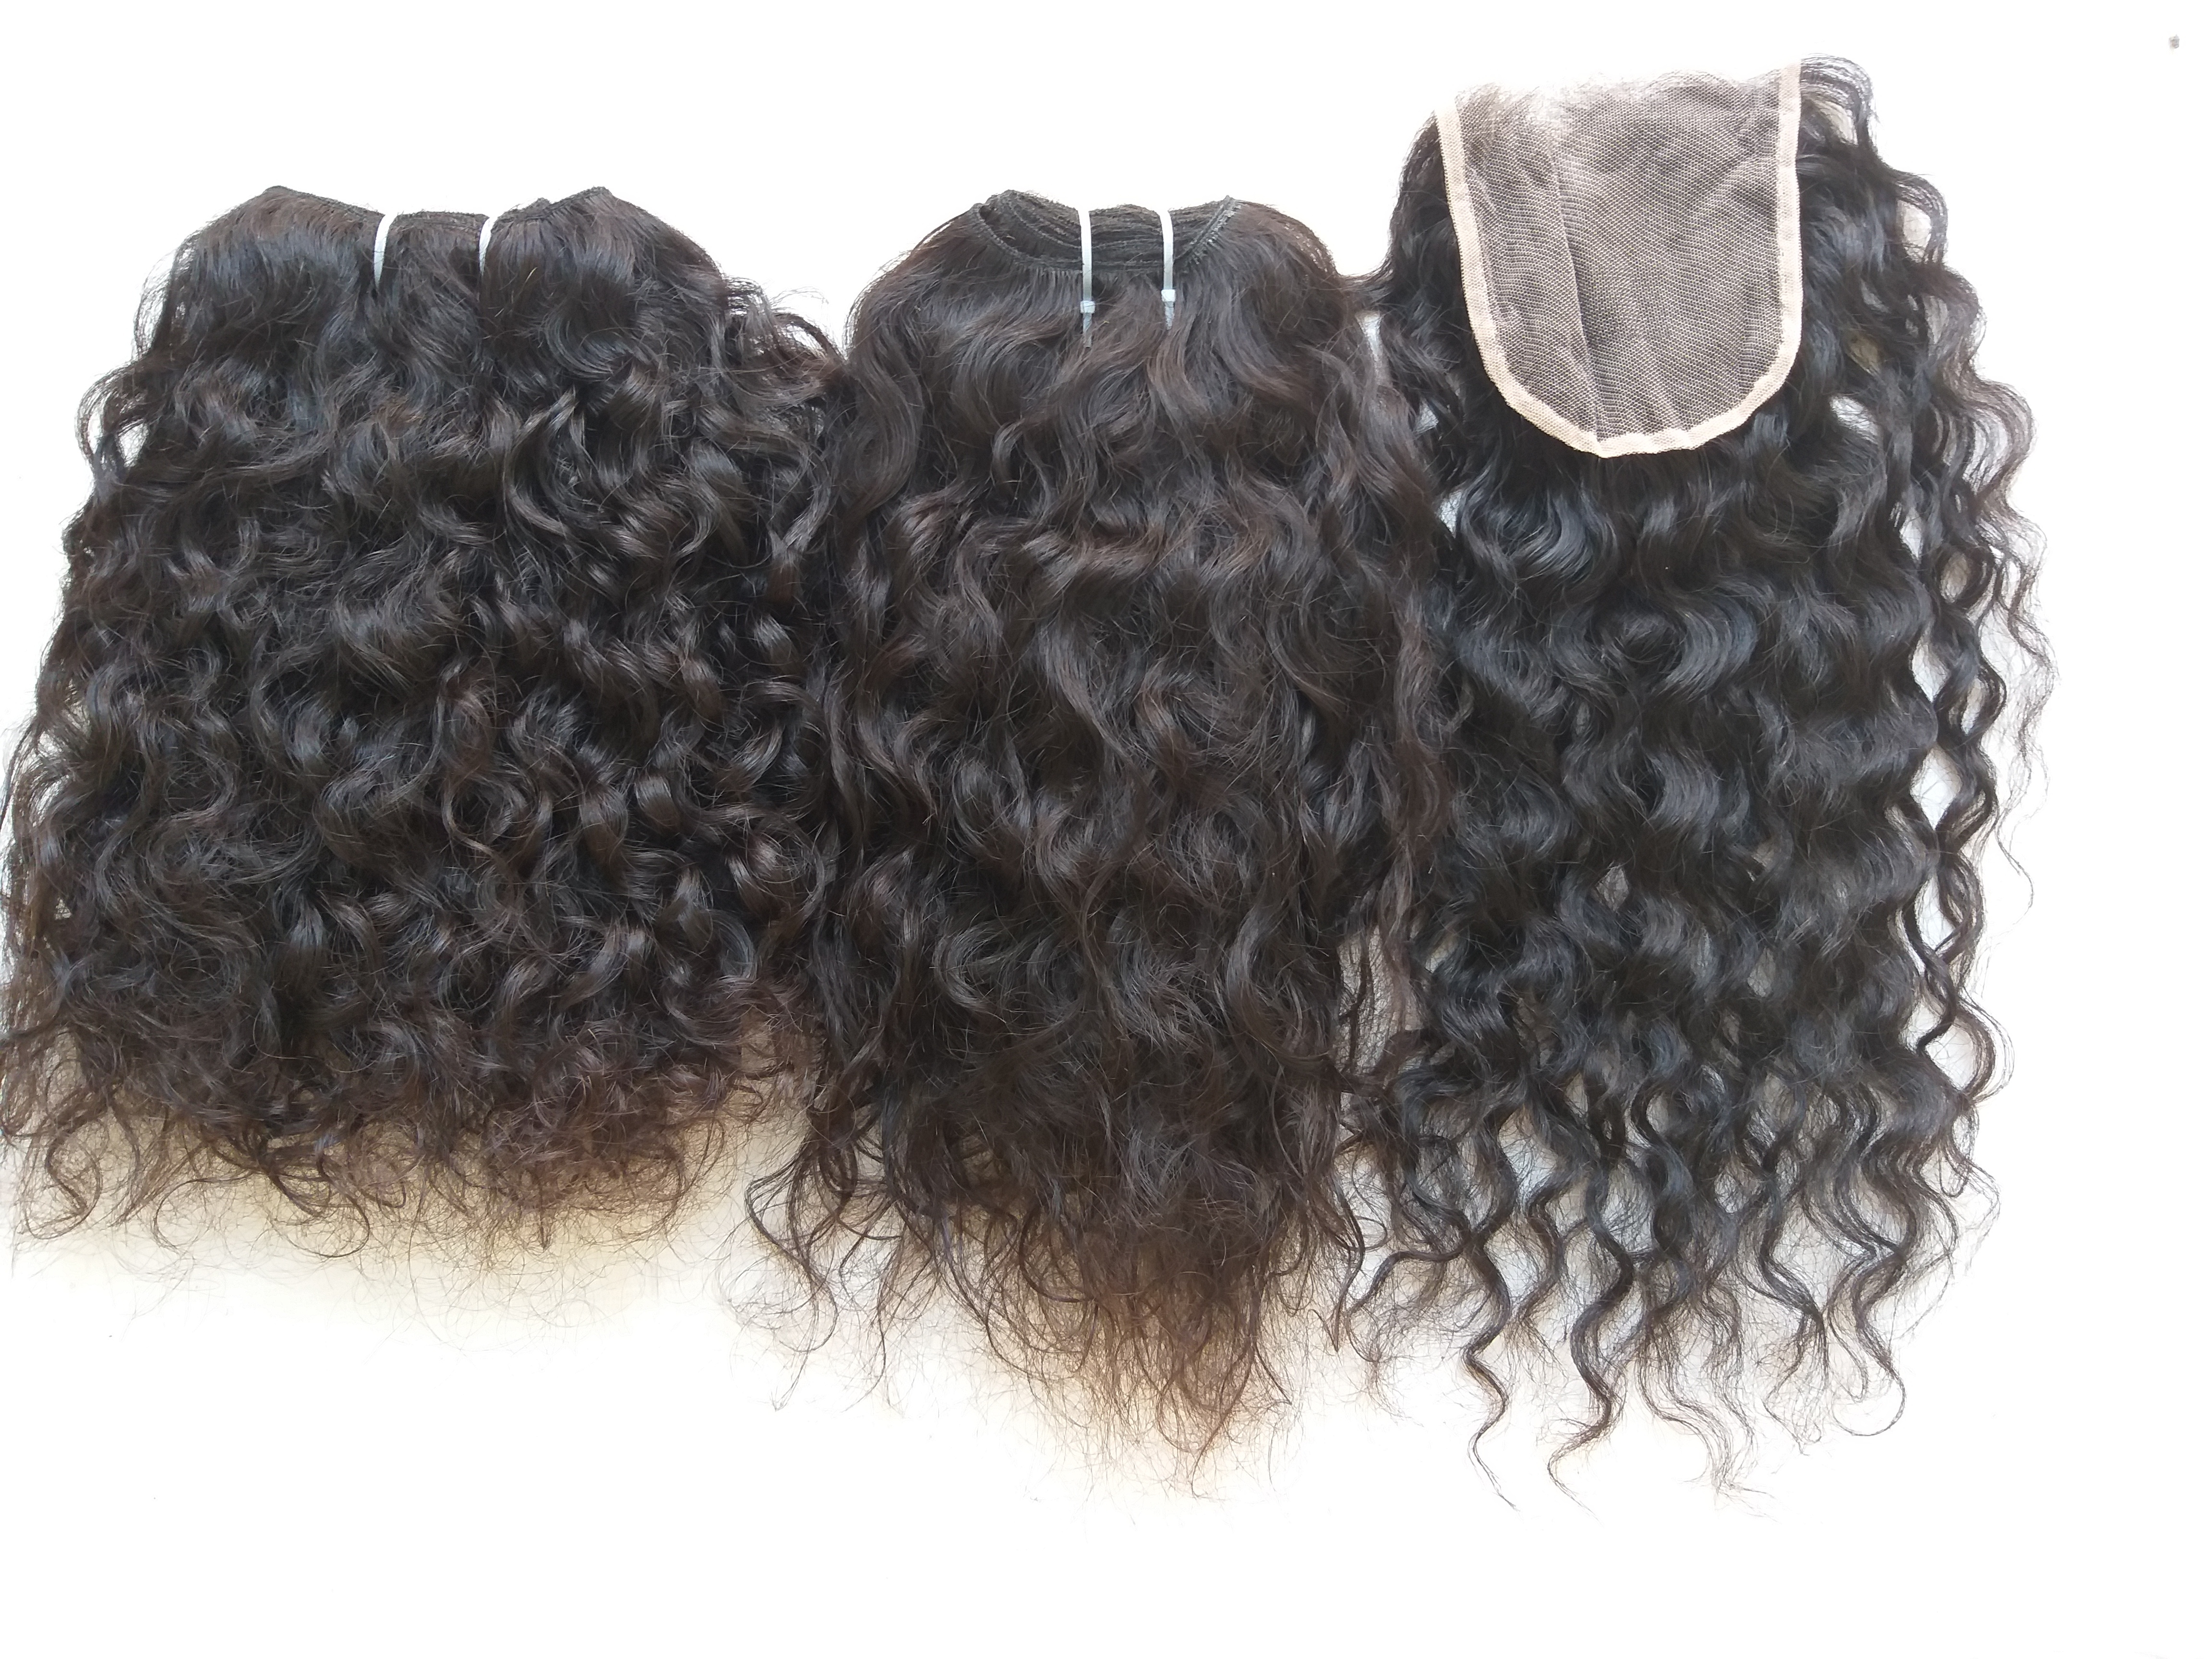 Unprocessed Raw Natural Curly Hair Closure